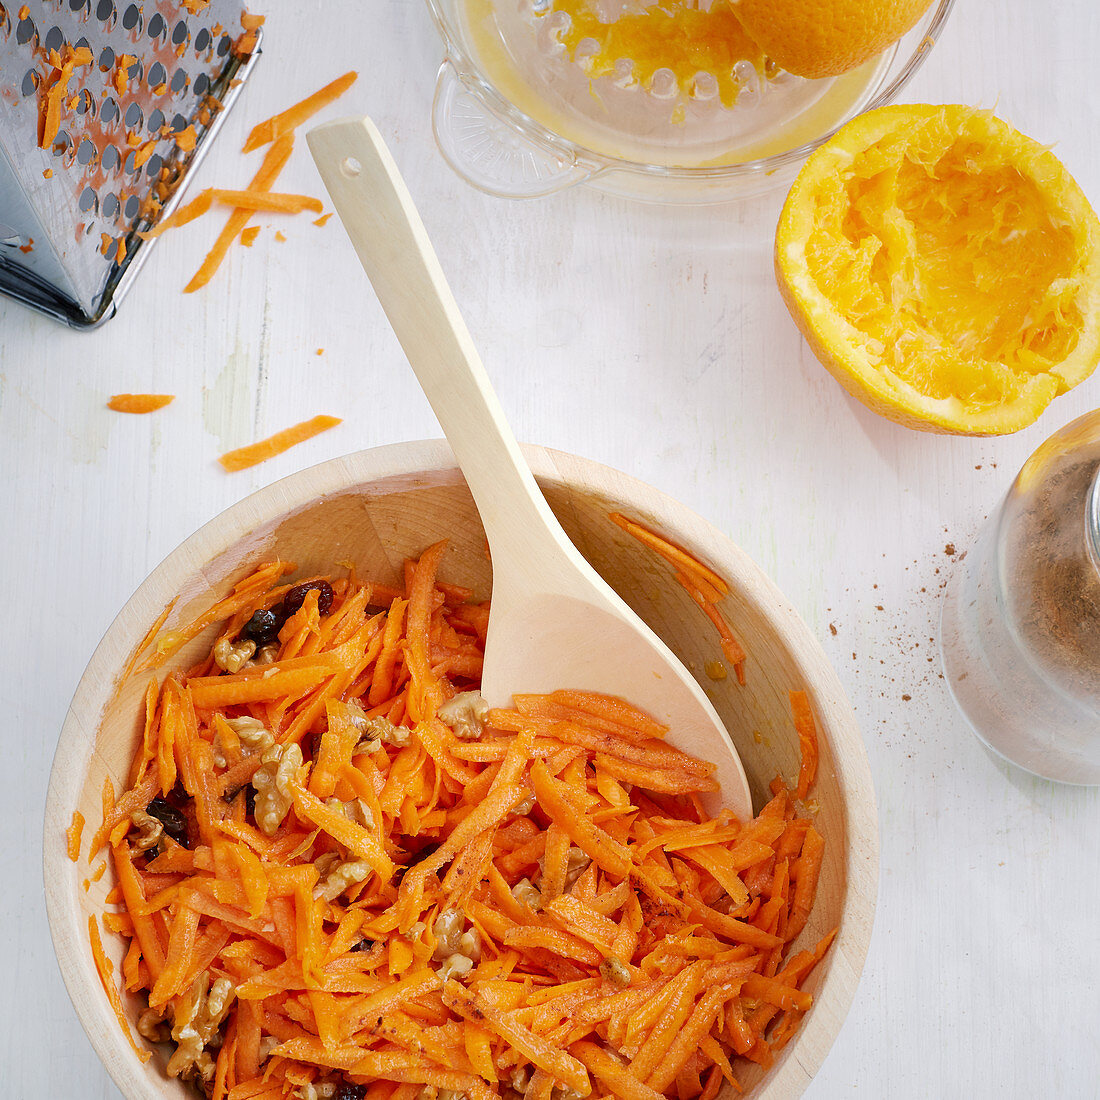 Carrot salad with oranges, raisins and walnuts